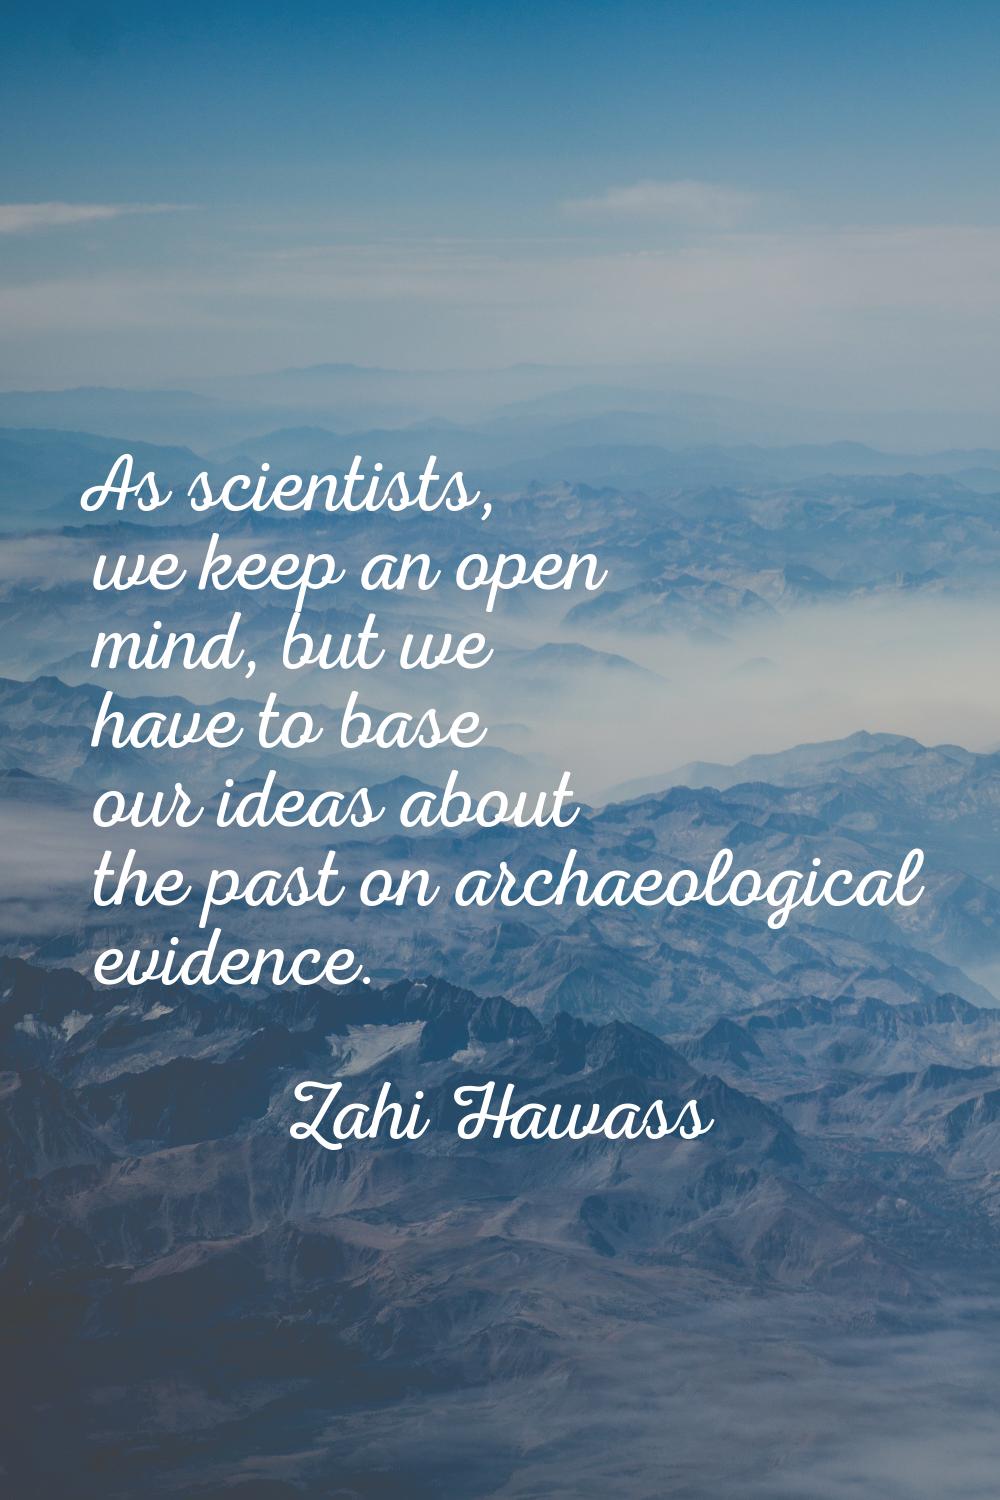 As scientists, we keep an open mind, but we have to base our ideas about the past on archaeological